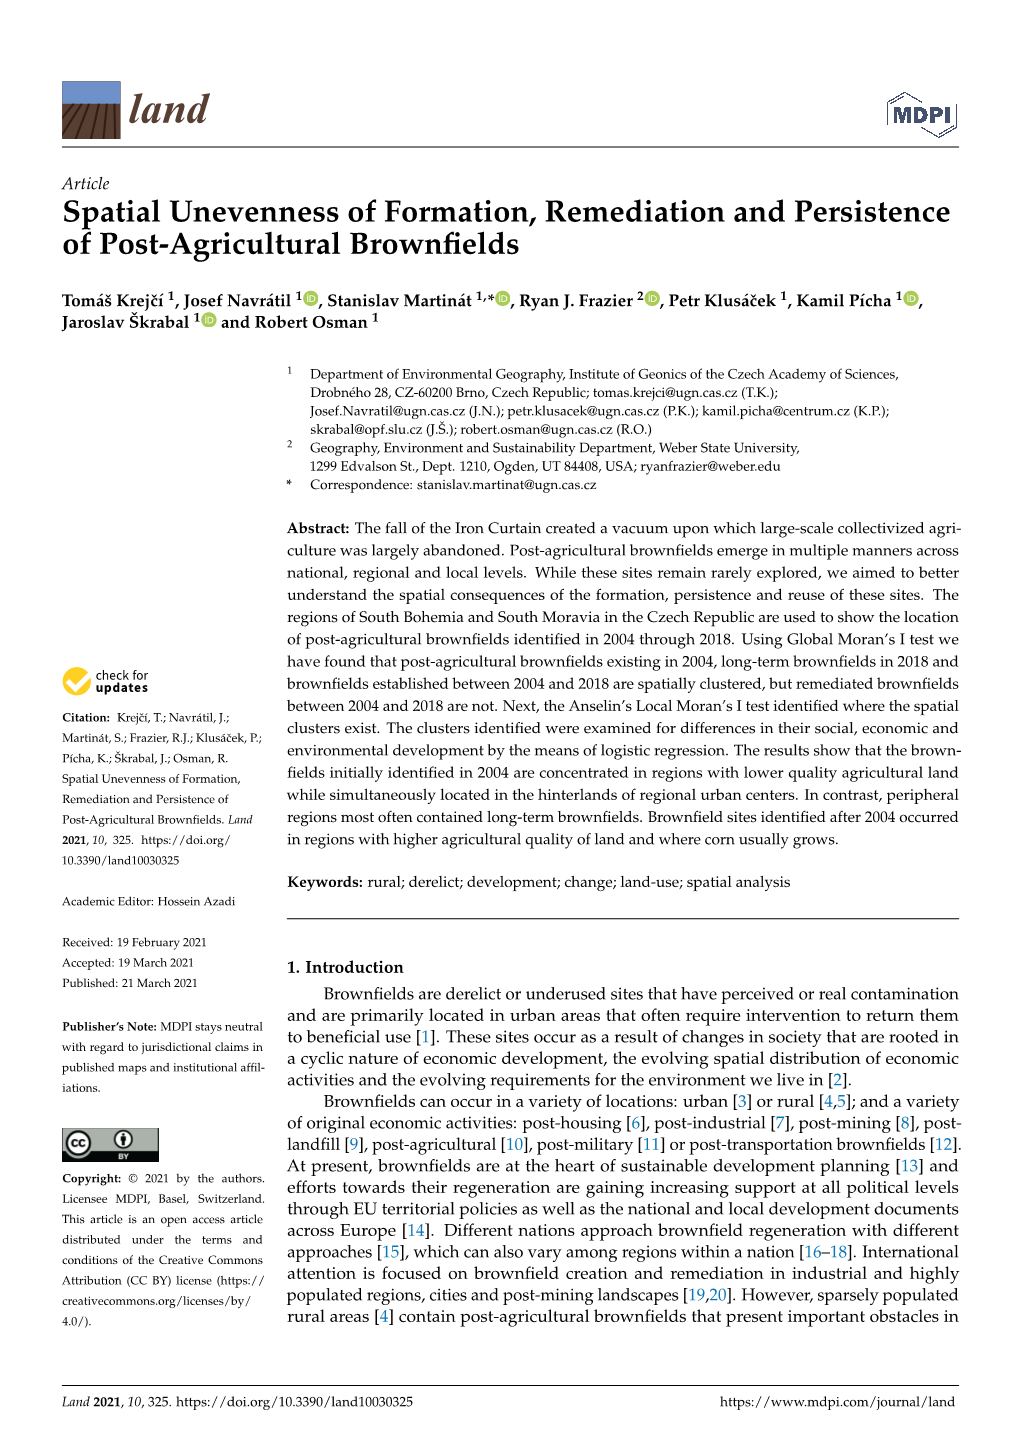 Spatial Unevenness of Formation, Remediation and Persistence of Post-Agricultural Brownﬁelds